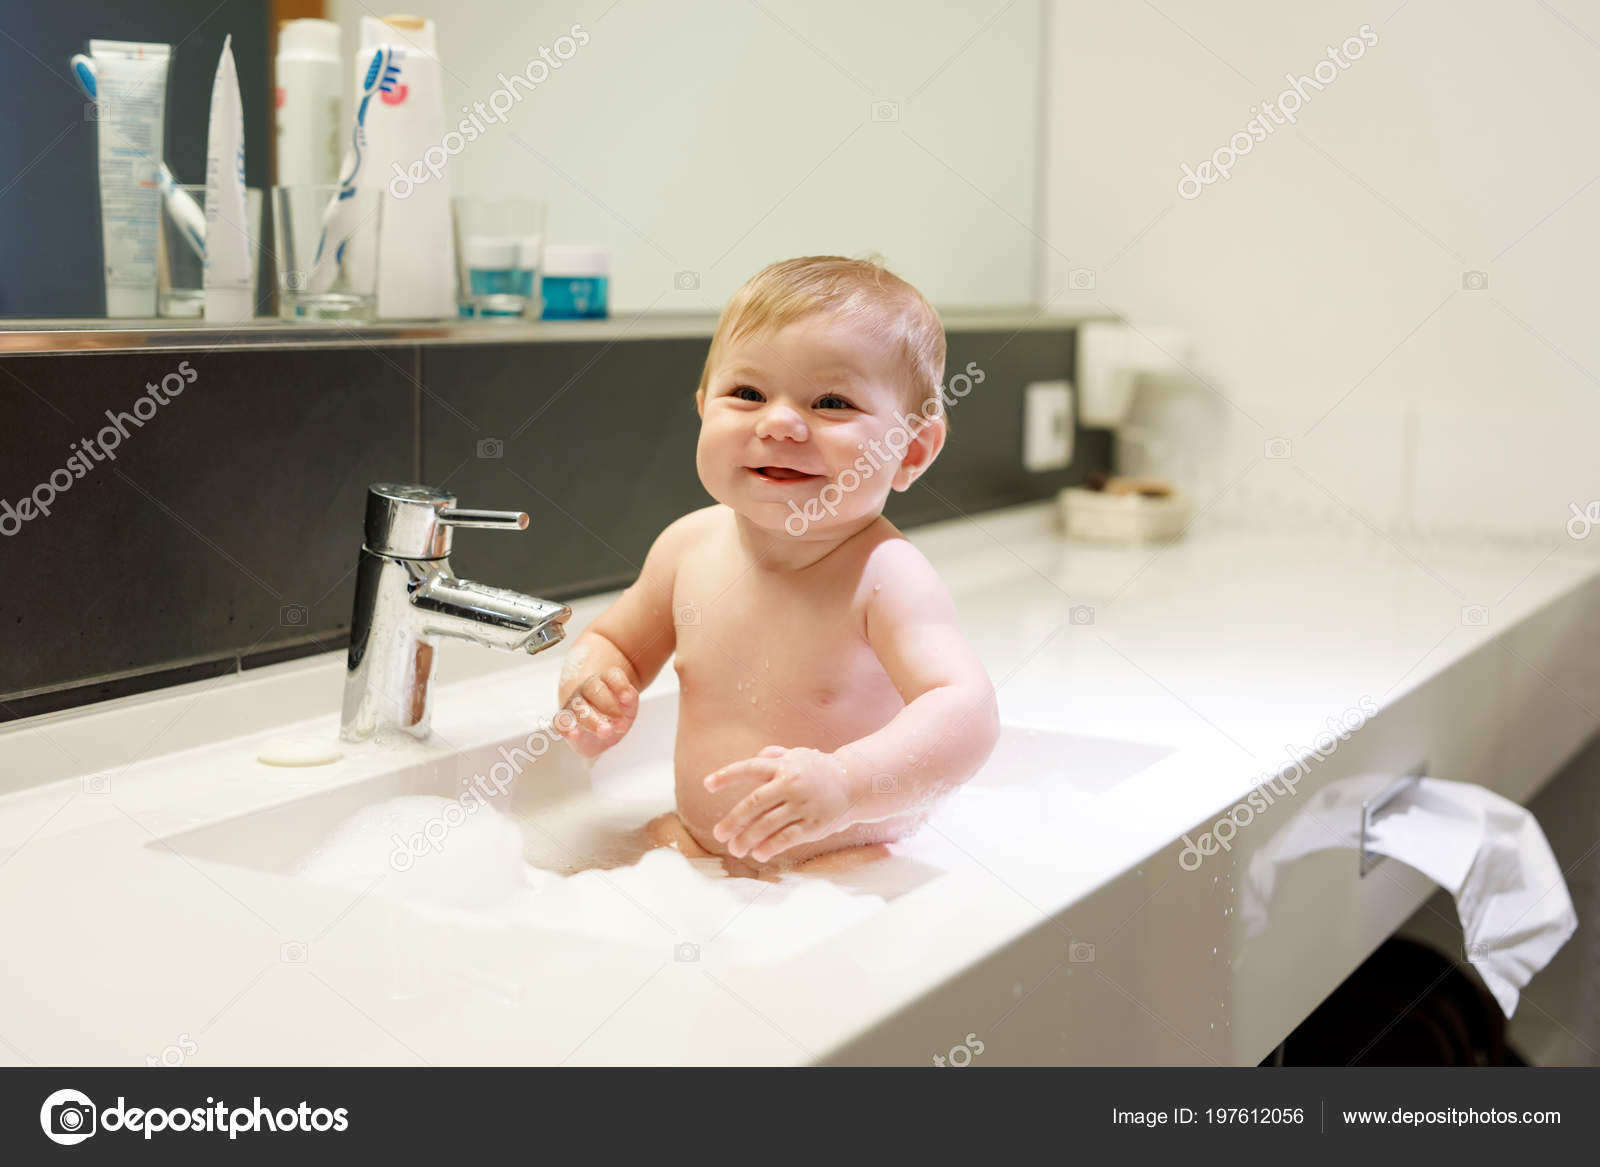 Cute Adorable Baby Taking Bath In Washing Sink And Playing